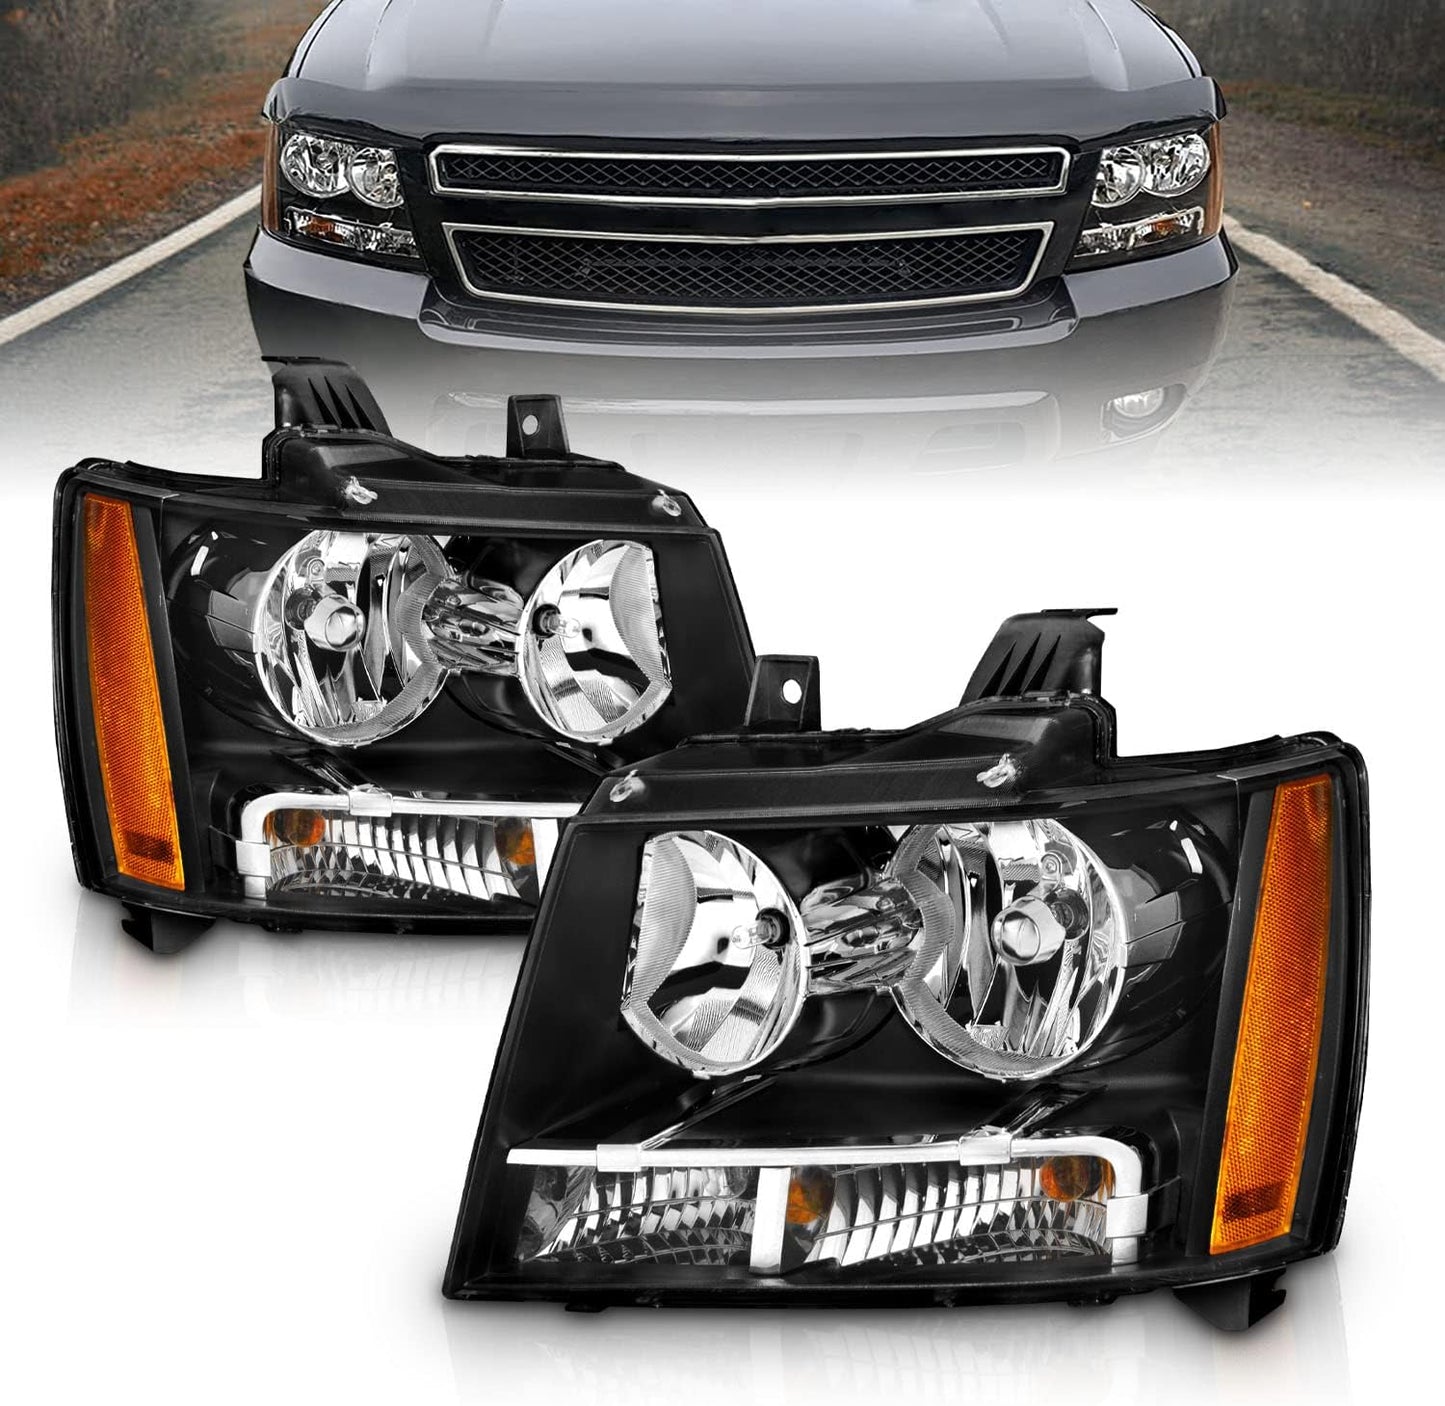 Halogen Car Headlight Pair With Bulbs and Harness Replacement For Chevy Tahoe Suburban Avalanche